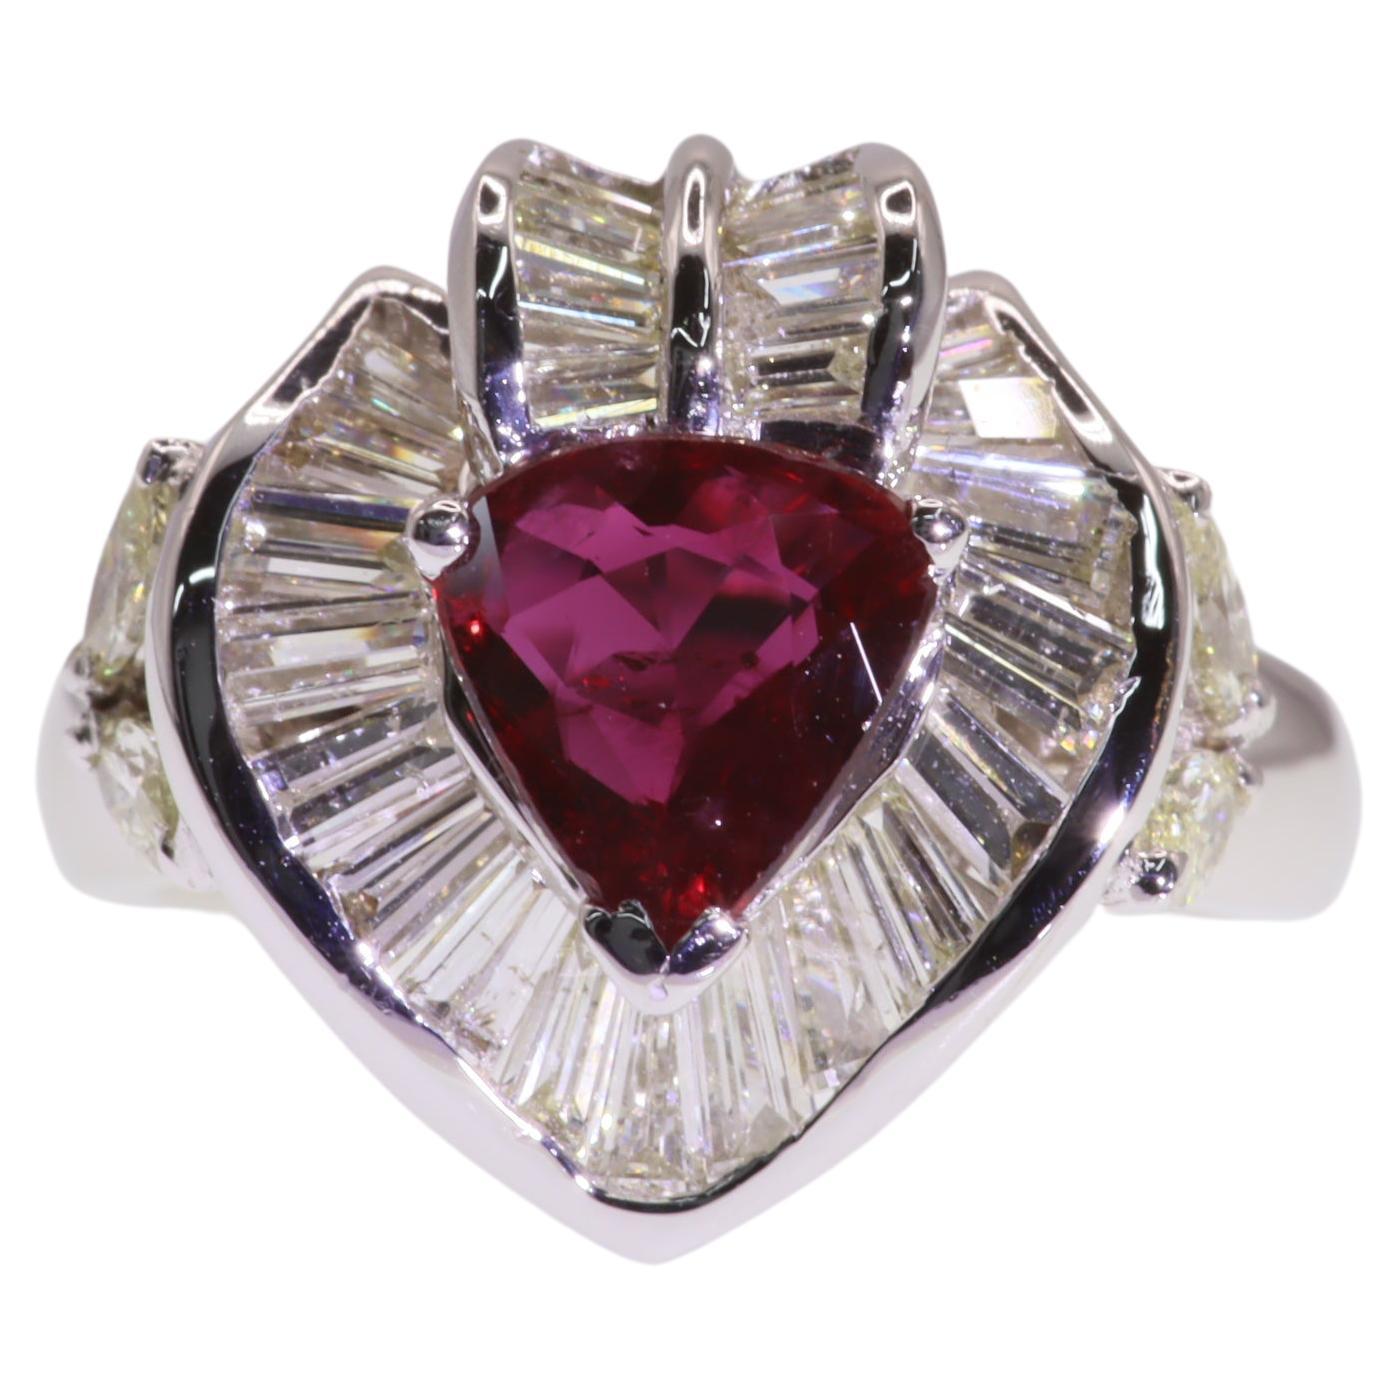 Indulge in the ultimate expression of elegance and luxury with this mesmerizing IGI Certified 1.35 Carat Pear-Shaped Ruby Ring. This captivating piece showcases a vivid purplish red ruby, certified by IGI, in a stunning pear shape that radiates